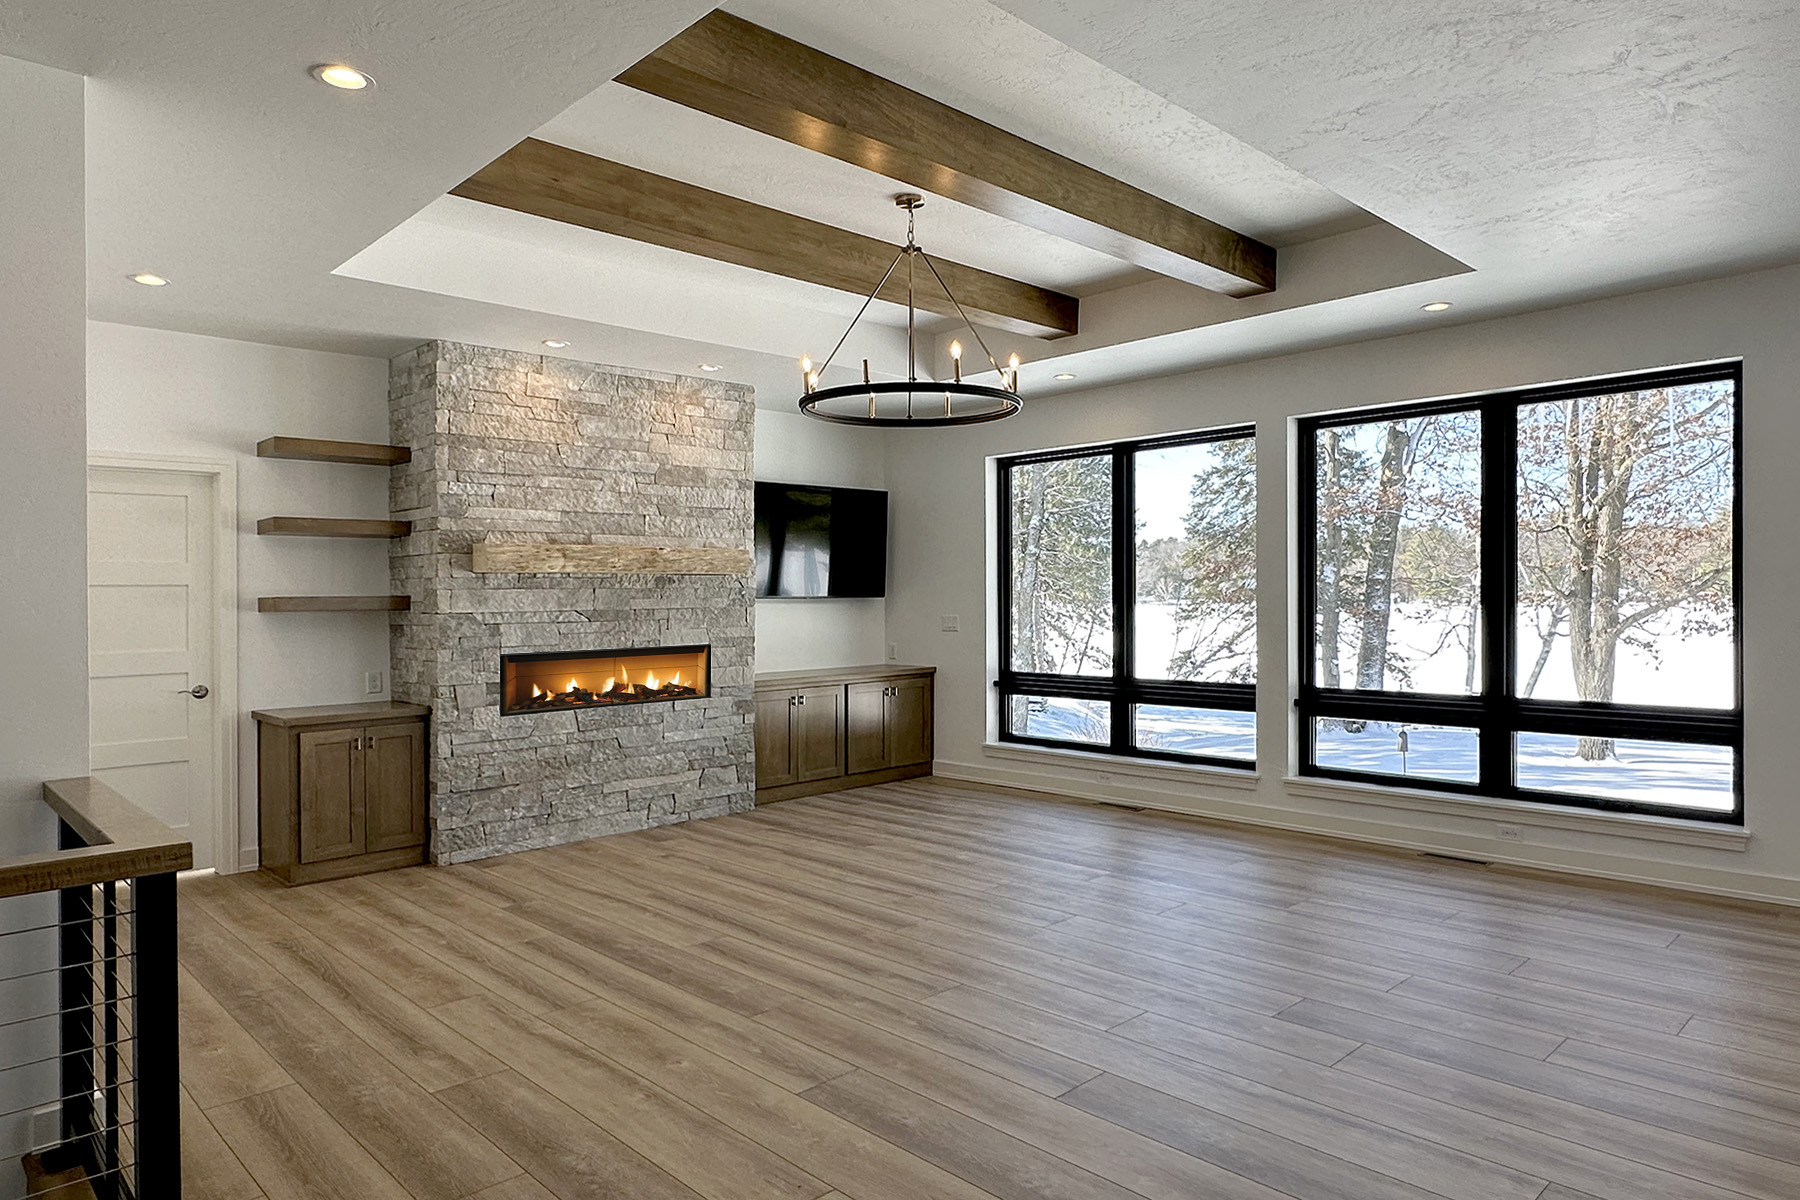 N3101 Right of Way Road Great Room. Stacked Stone Linear Modern Fireplace. Built-in Cabinets with Floating Shelves. Black windows with plastered drywall returns. Tray ceiling with stained maple wood beams. Luxury vinyl plank floors. 4-panel interior doors.